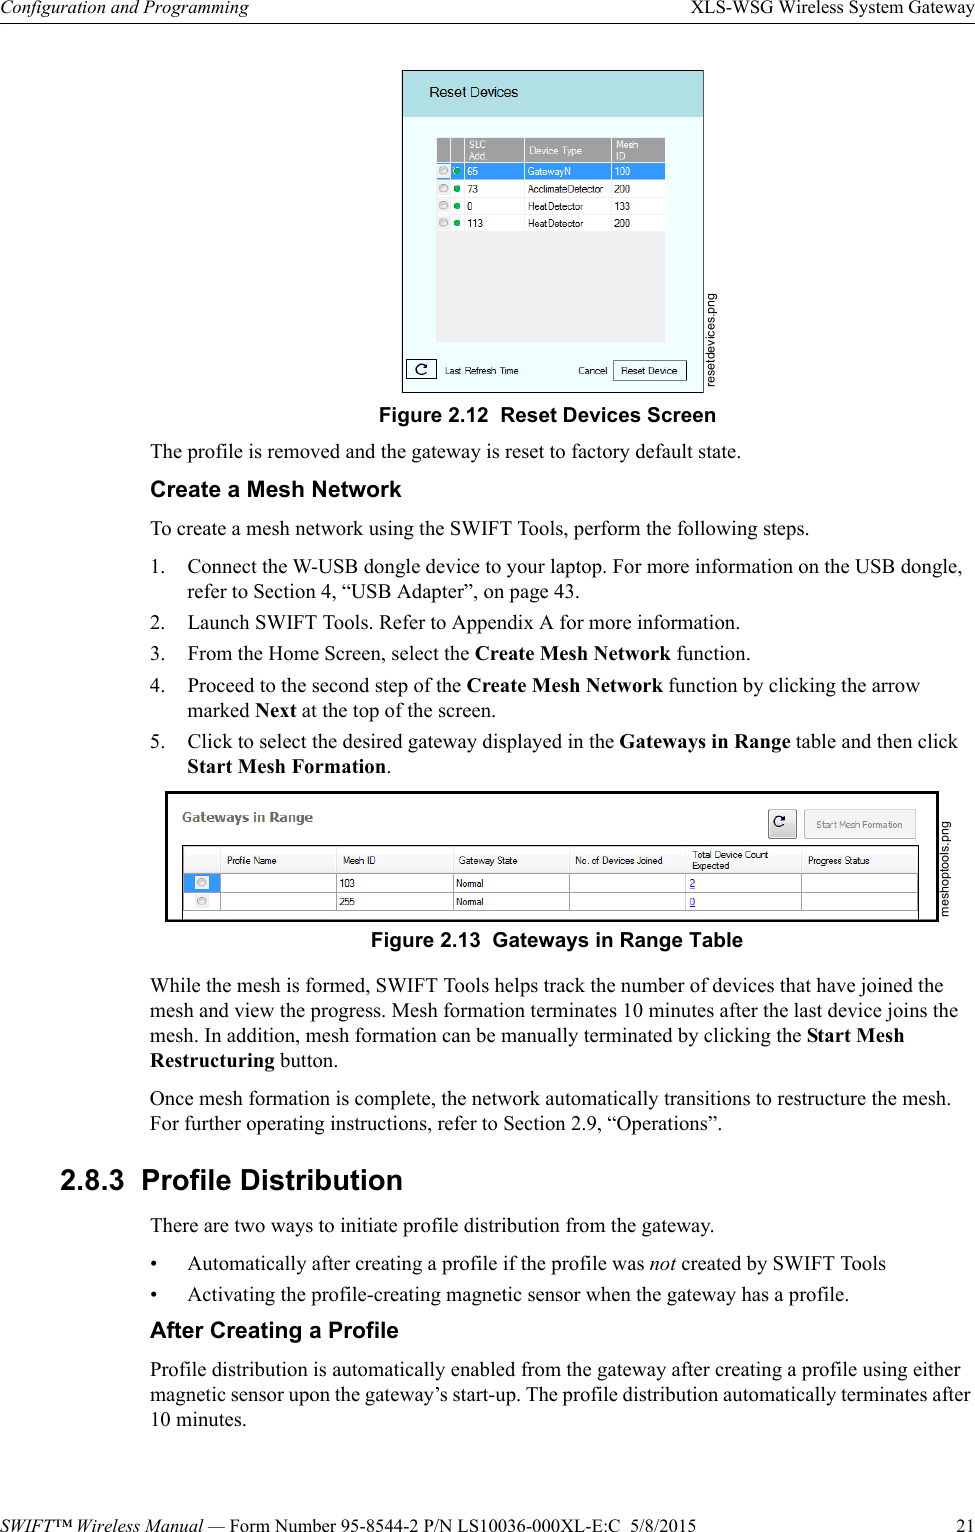 SWIFT™ Wireless Manual — Form Number 95-8544-2 P/N LS10036-000XL-E:C  5/8/2015  21Configuration and Programming XLS-WSG Wireless System GatewayThe profile is removed and the gateway is reset to factory default state.Create a Mesh NetworkTo create a mesh network using the SWIFT Tools, perform the following steps.1. Connect the W-USB dongle device to your laptop. For more information on the USB dongle, refer to Section 4, “USB Adapter”, on page 43.2. Launch SWIFT Tools. Refer to Appendix A for more information.3. From the Home Screen, select the Create Mesh Network function.4. Proceed to the second step of the Create Mesh Network function by clicking the arrow marked Next at the top of the screen.5. Click to select the desired gateway displayed in the Gateways in Range table and then click Start Mesh Formation.While the mesh is formed, SWIFT Tools helps track the number of devices that have joined the mesh and view the progress. Mesh formation terminates 10 minutes after the last device joins the mesh. In addition, mesh formation can be manually terminated by clicking the Start Mesh Restructuring button.Once mesh formation is complete, the network automatically transitions to restructure the mesh. For further operating instructions, refer to Section 2.9, “Operations”.2.8.3  Profile DistributionThere are two ways to initiate profile distribution from the gateway.• Automatically after creating a profile if the profile was not created by SWIFT Tools• Activating the profile-creating magnetic sensor when the gateway has a profile.After Creating a ProfileProfile distribution is automatically enabled from the gateway after creating a profile using either magnetic sensor upon the gateway’s start-up. The profile distribution automatically terminates after 10 minutes. resetdevices.pngFigure 2.12  Reset Devices Screenmeshoptools.pngFigure 2.13  Gateways in Range Table